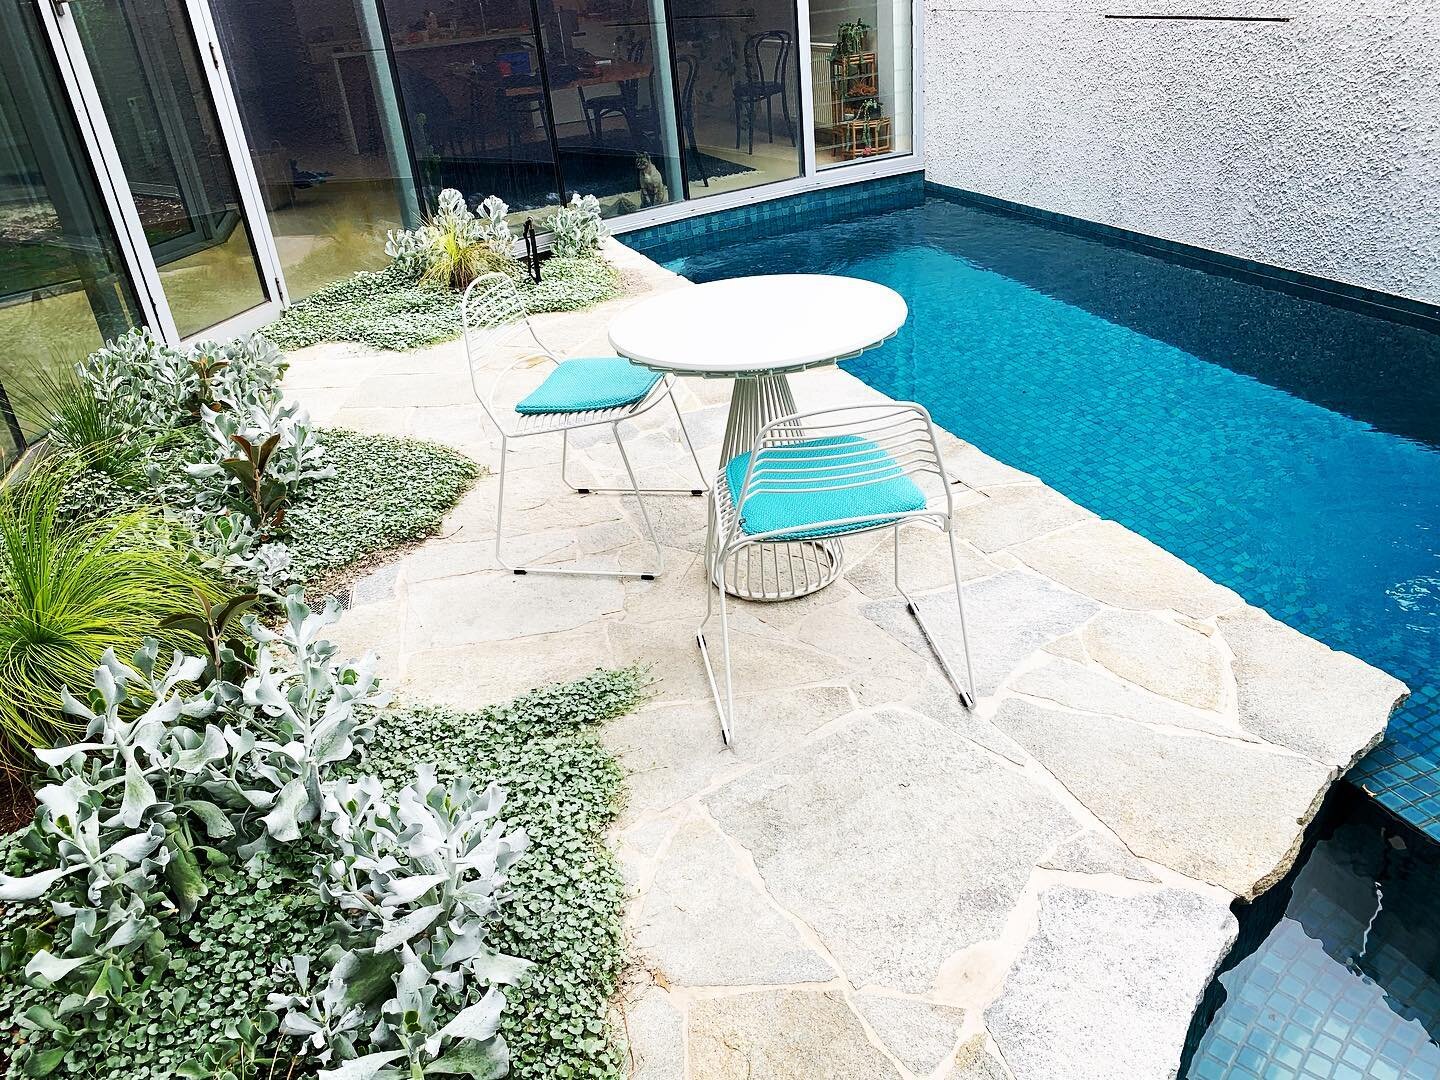 Brunswick Project
&bull;
Pool courtyard in the middle of the house. What a novel idea!
This little sanctuary is looked upon from all the habitable rooms of the home, meaning you can always view your escape from the everyday.
&bull;

Design @annabelle